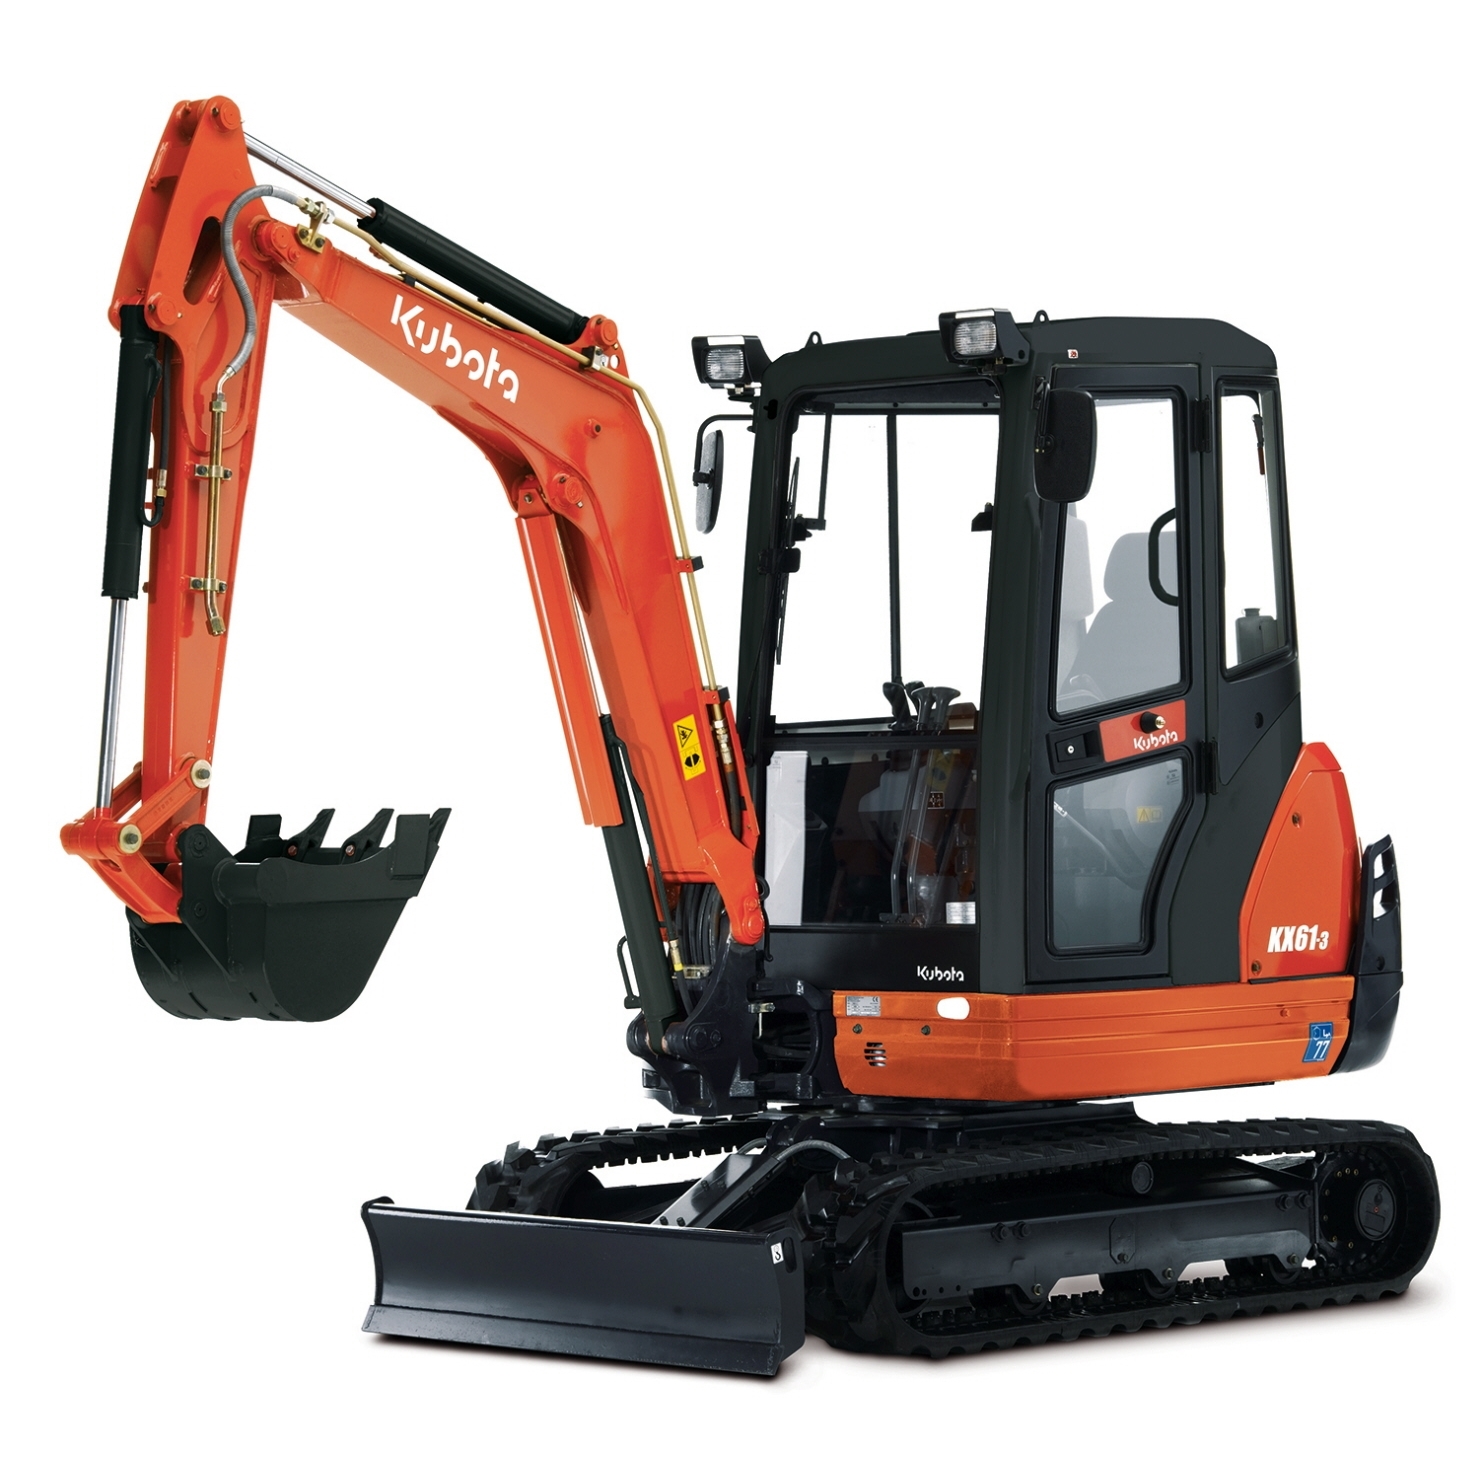 Digger Hire in Chelmsford